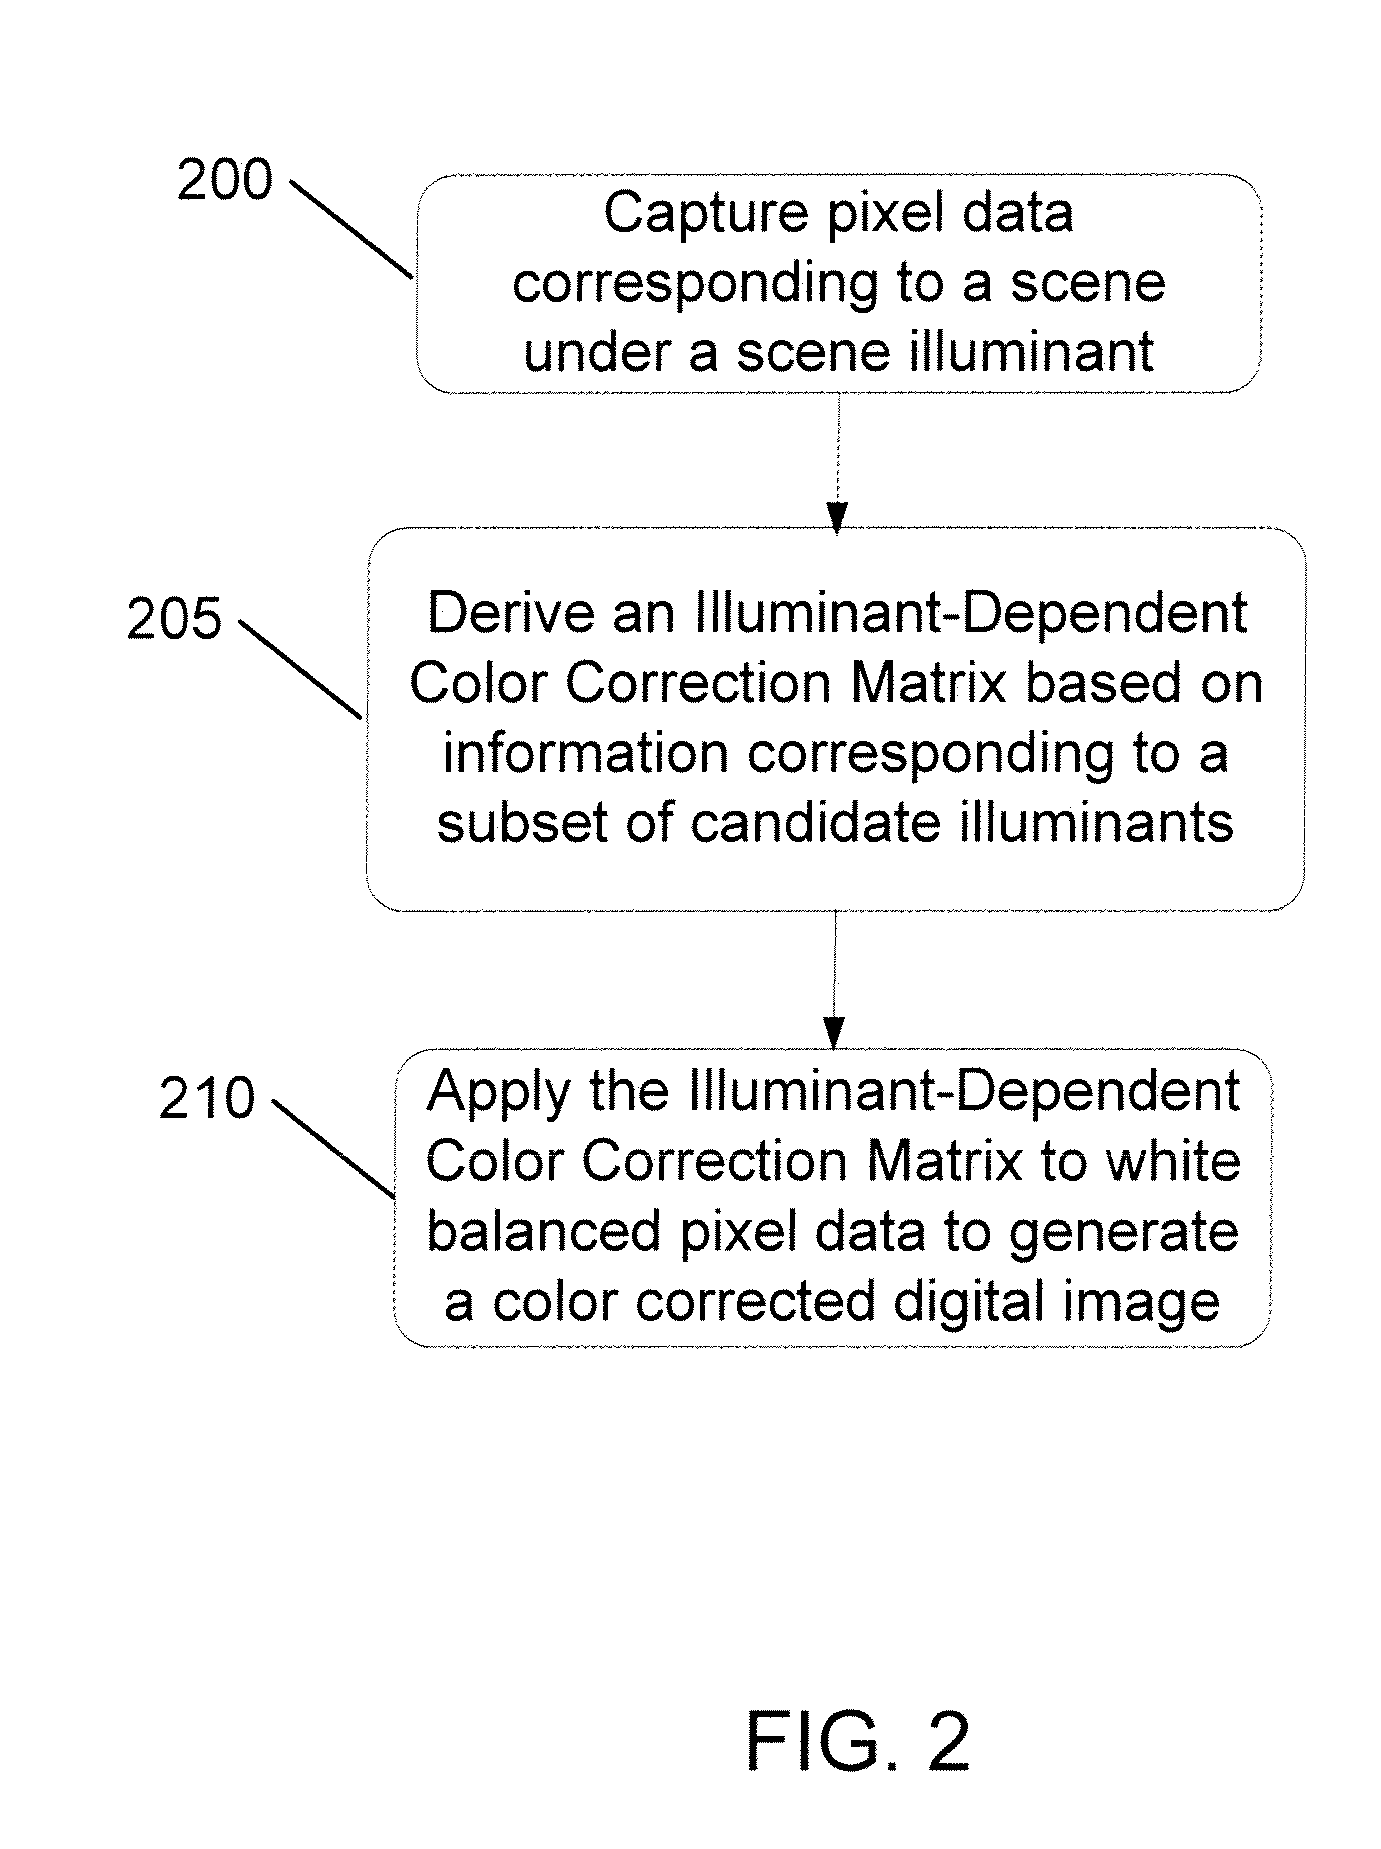 Image sensor apparatus and method for color correction with an illuminant-dependent color correction matrix